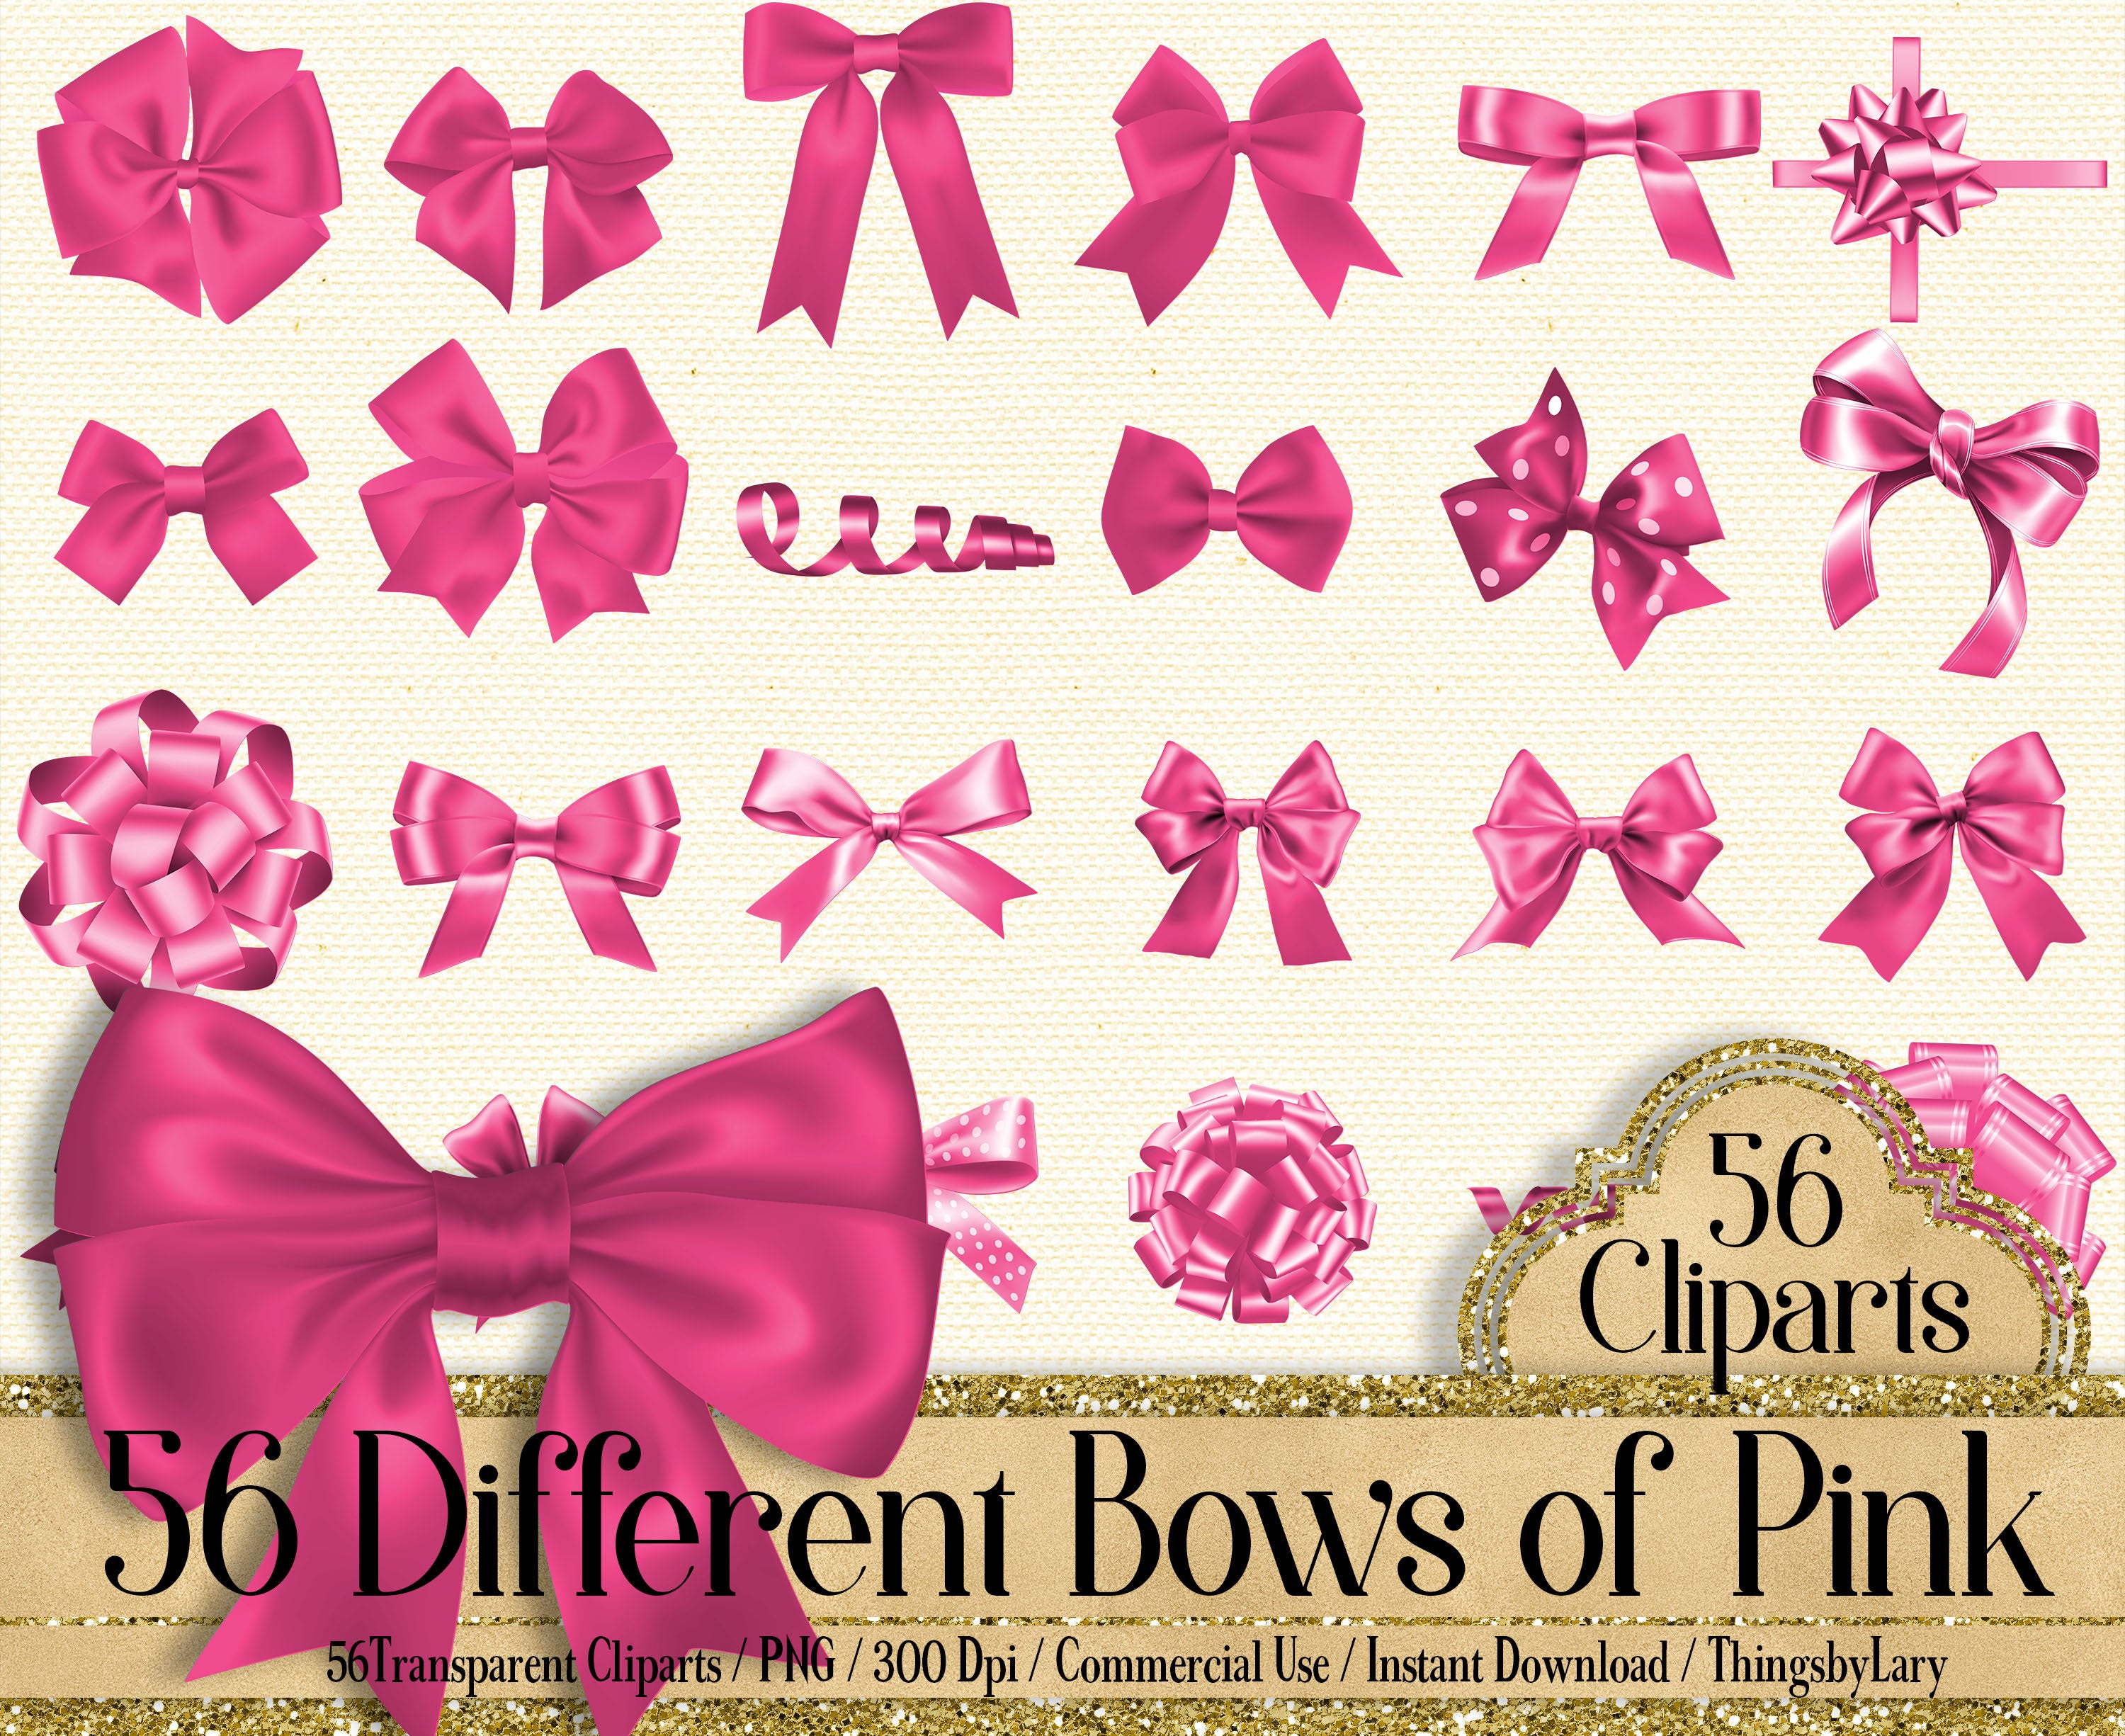 56 Pink Bows and Ribbons Cliparts, 300 Dpi, Instant Download, Commercial Use, Bridal Shower, Digital Bows, Wedding Invitation, Satin Bows